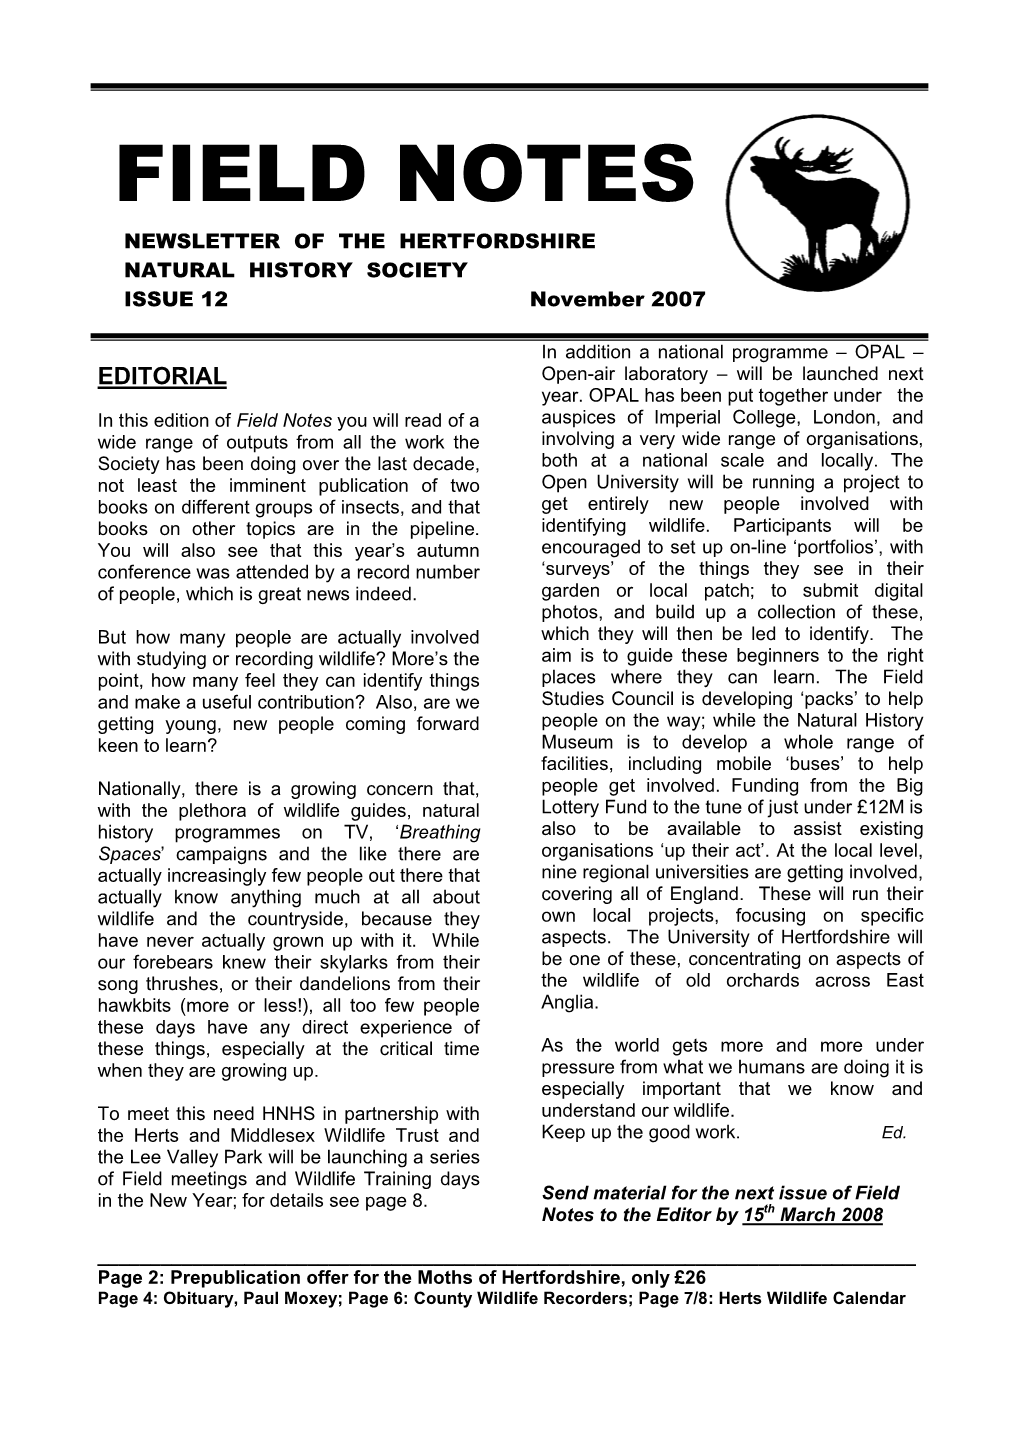 FIELD NOTES NEWSLETTER of the HERTFORDSHIRE NATURAL HISTORY SOCIETY ISSUE 12 November 2007